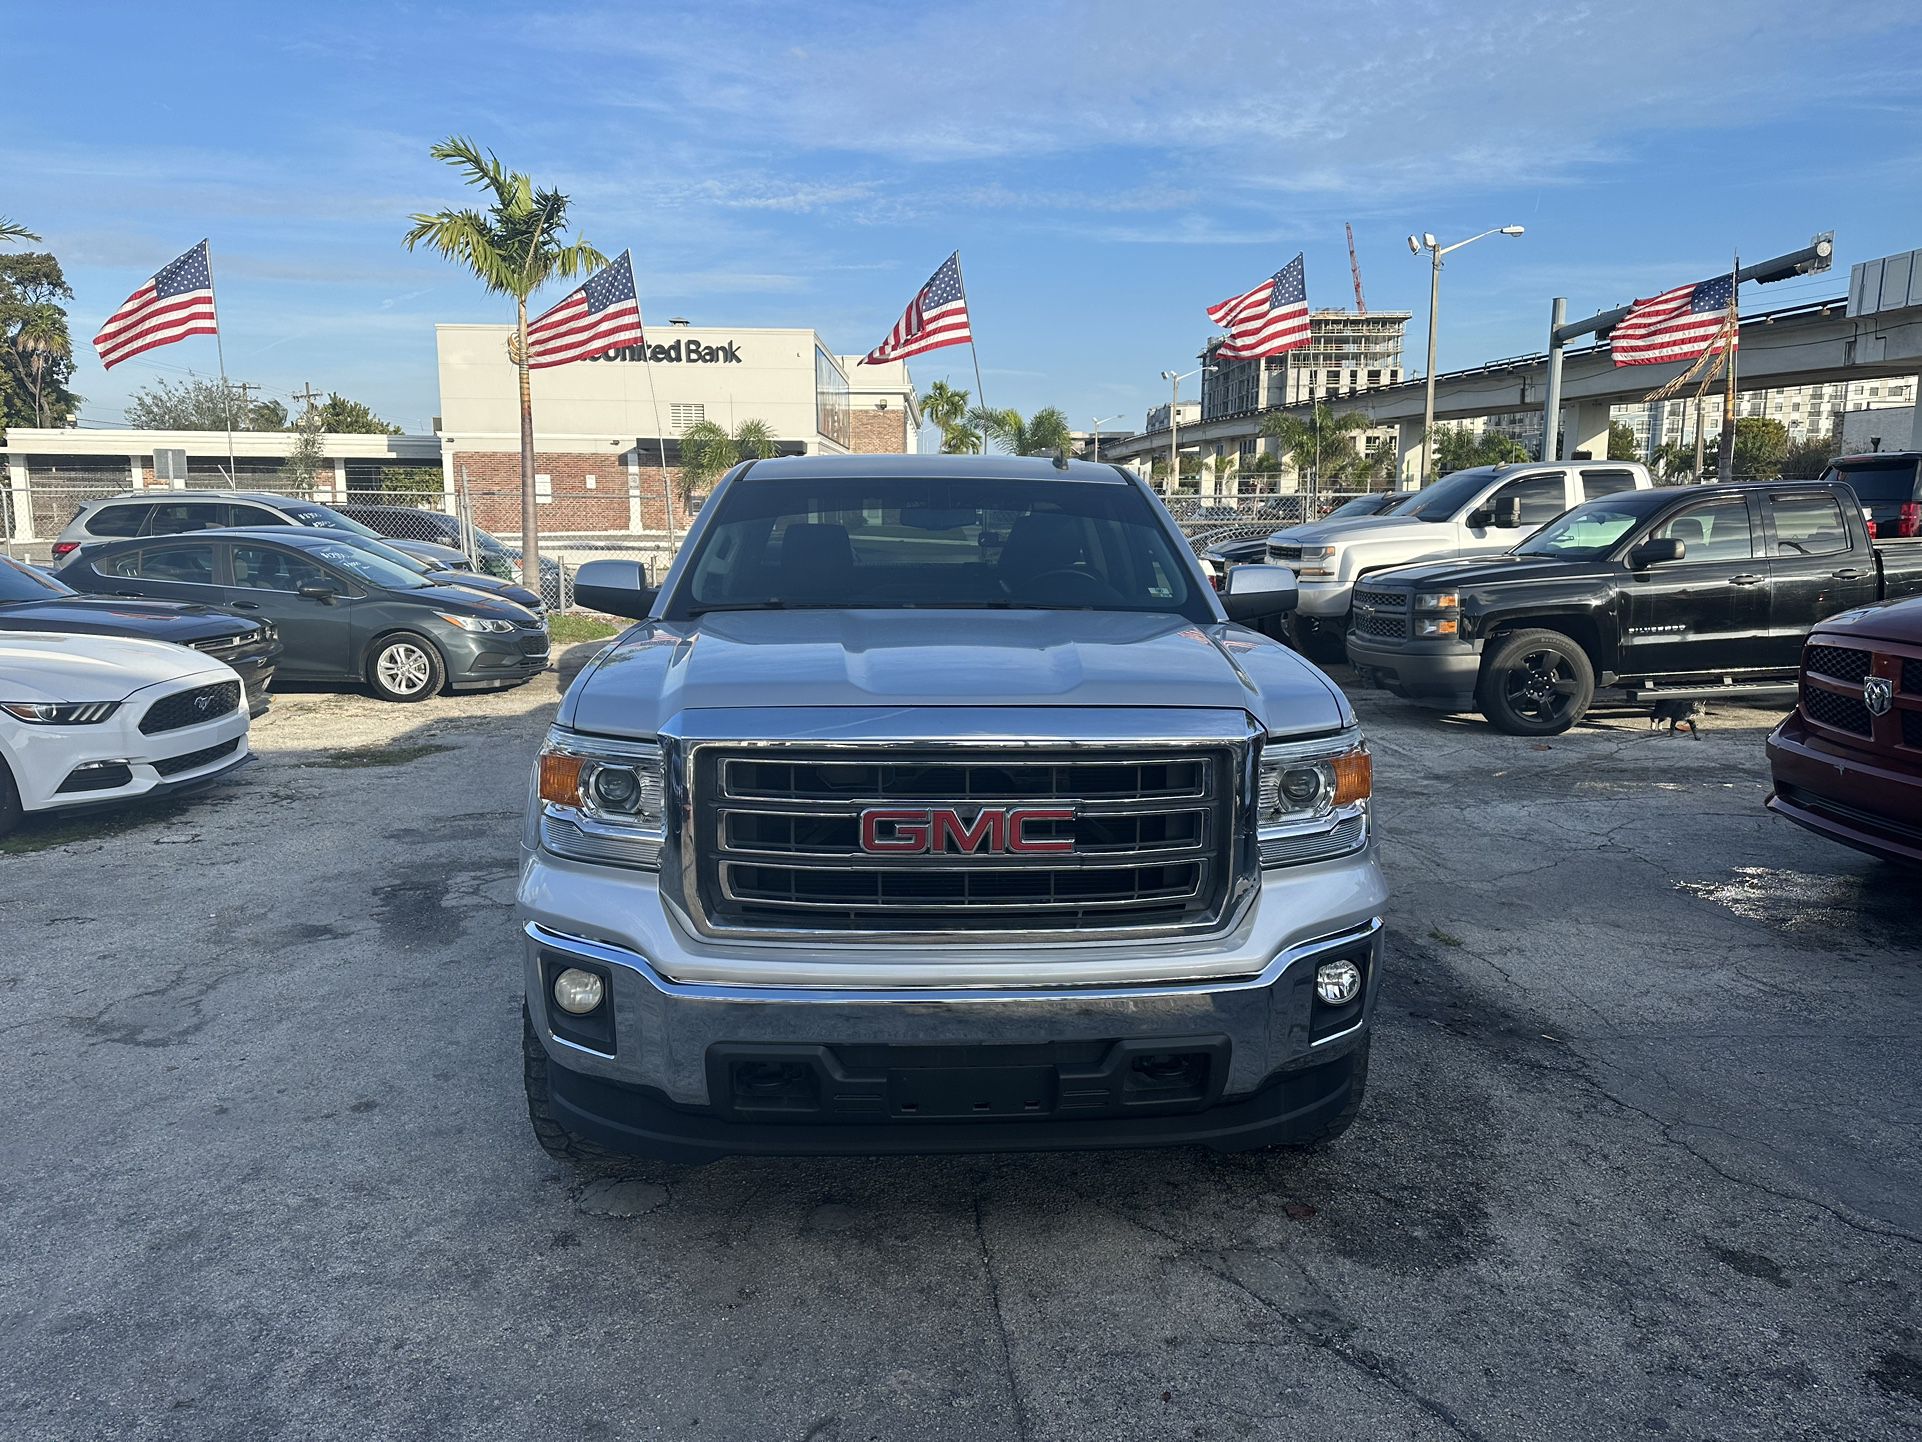 used 2014 gmc Sierra - front view 3